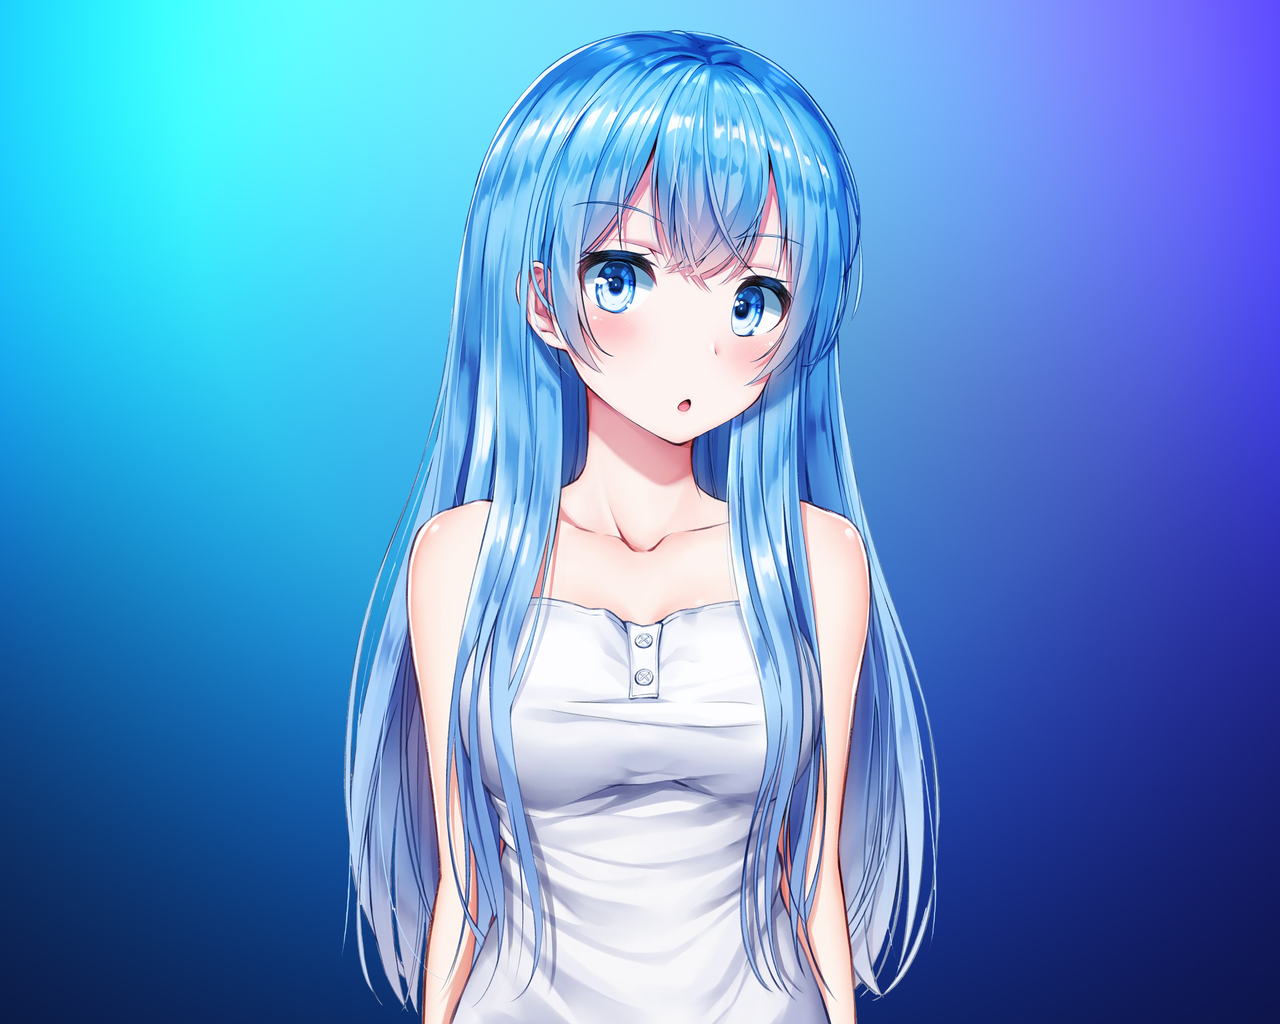 10. "Anime Girl with Blue Hair and Swimsuit" - wide 7